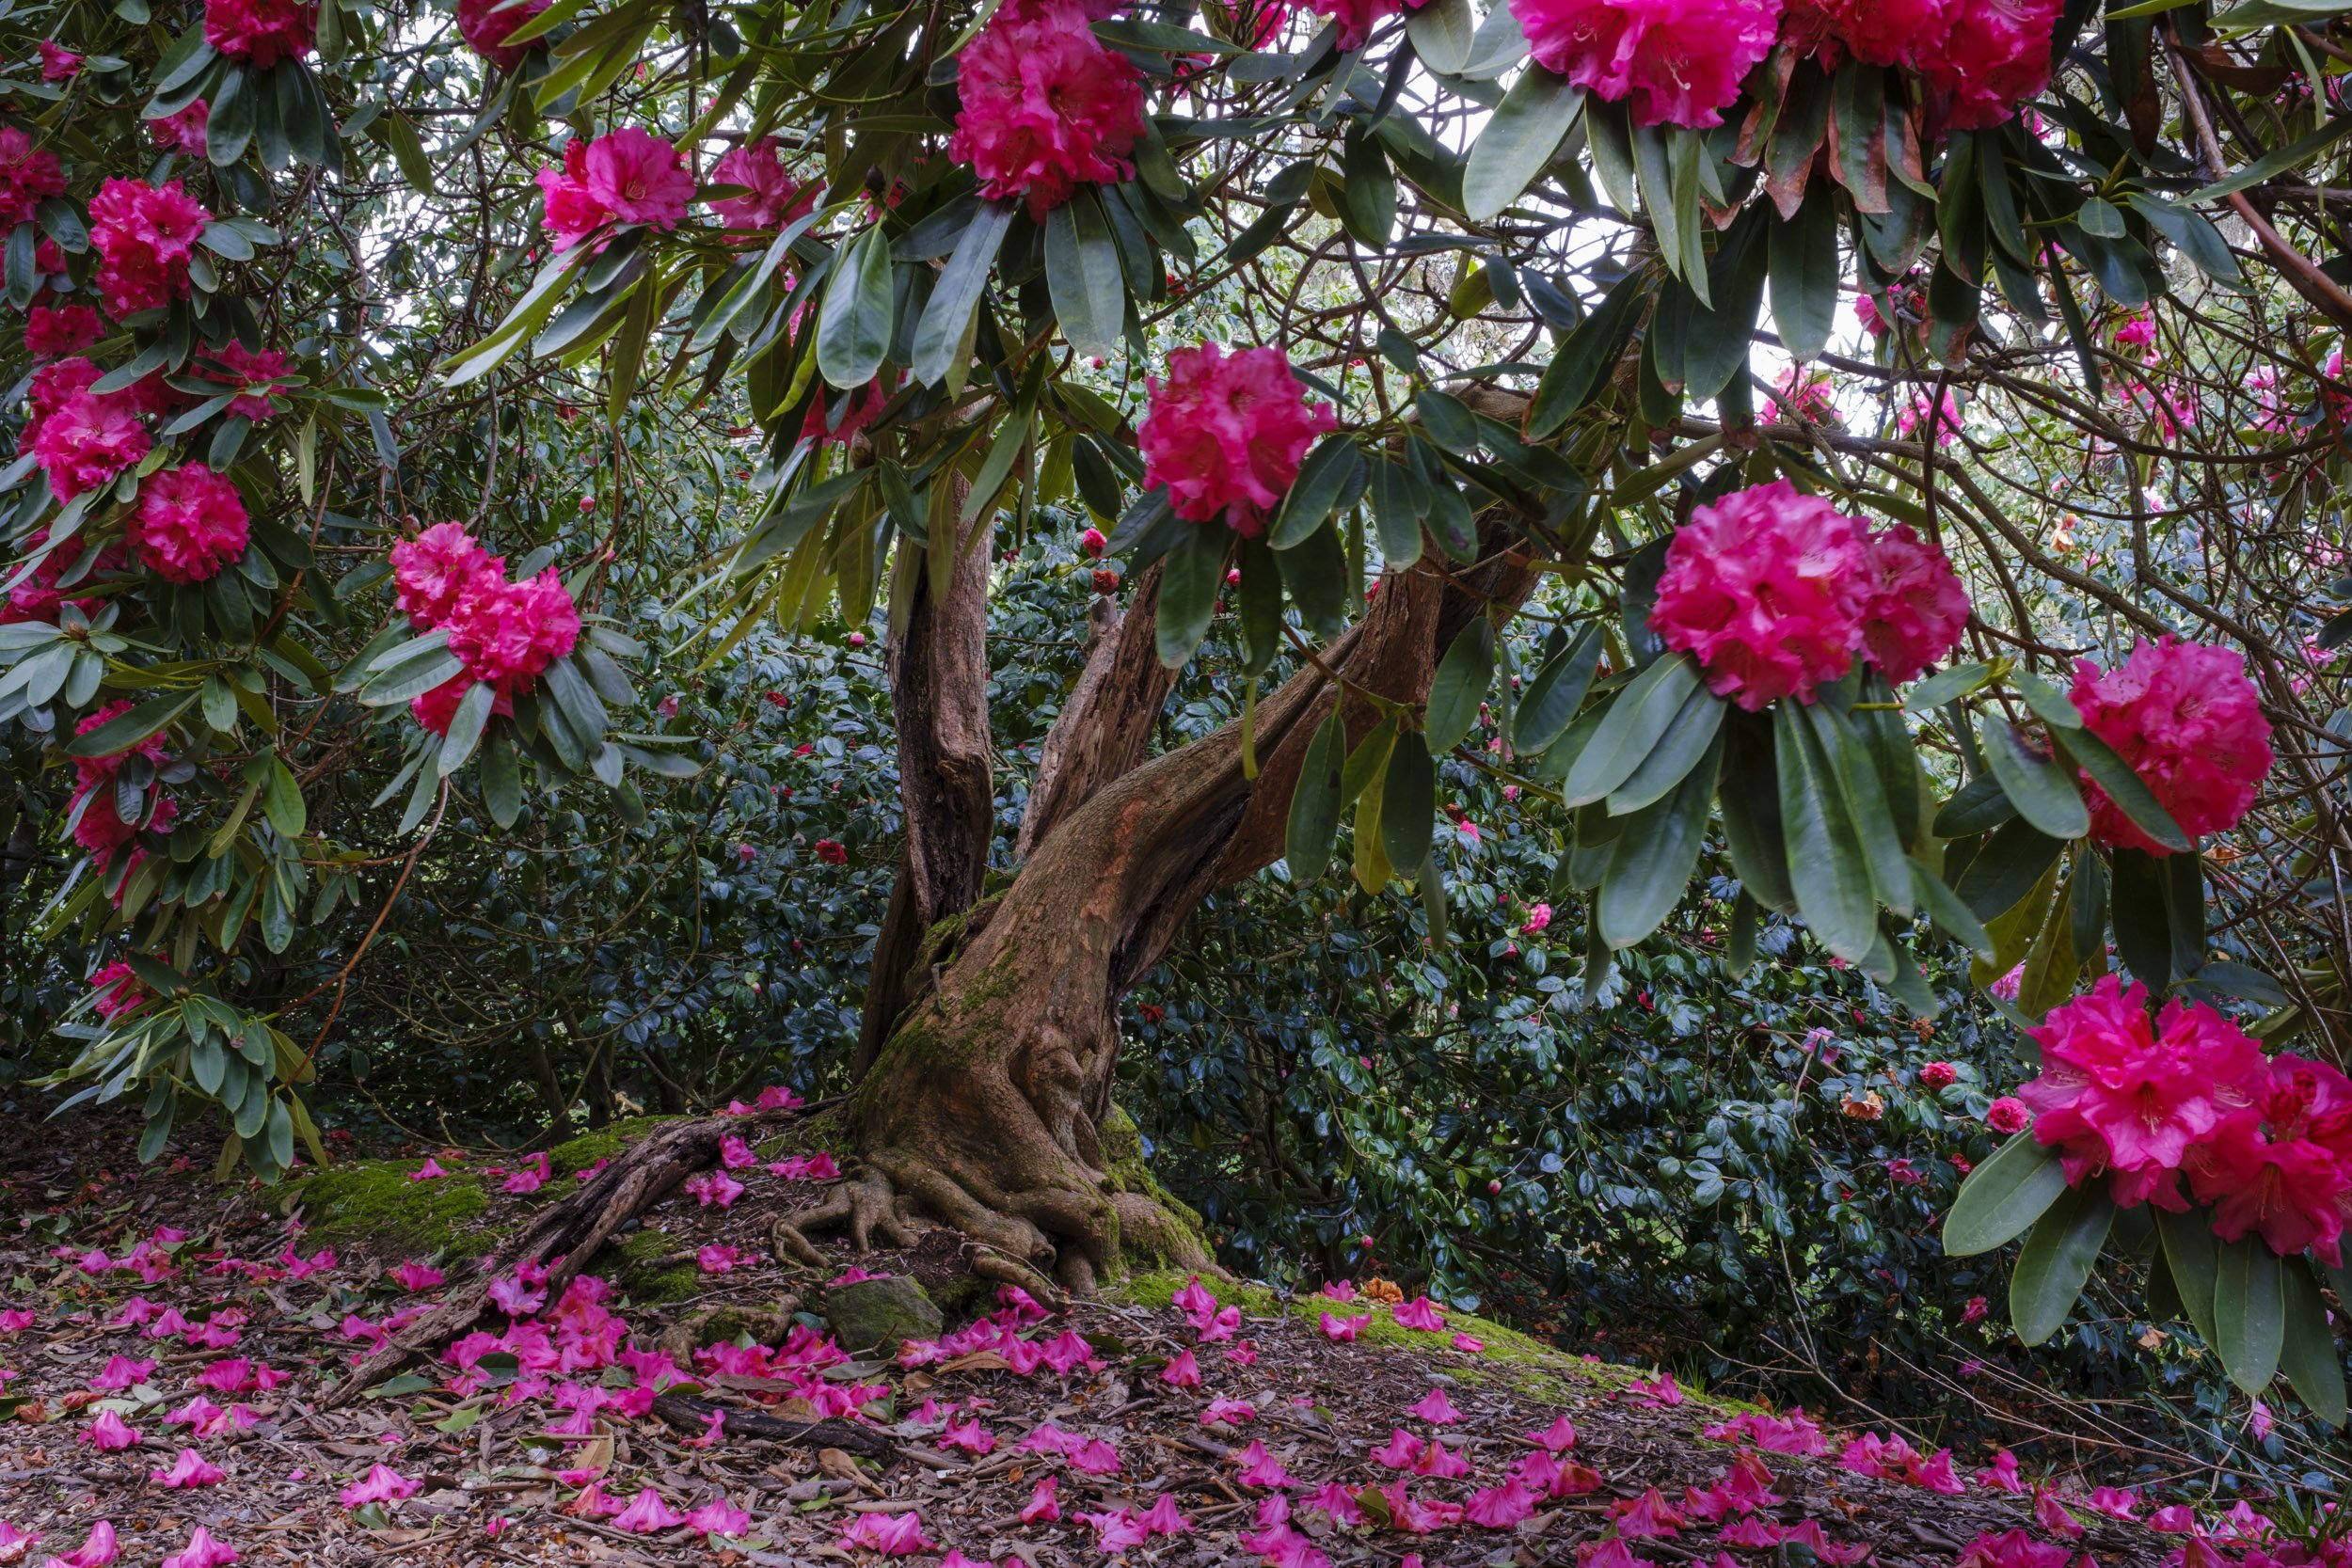 Photography of Rhododendron petals fallen from tree and carpeting the ground